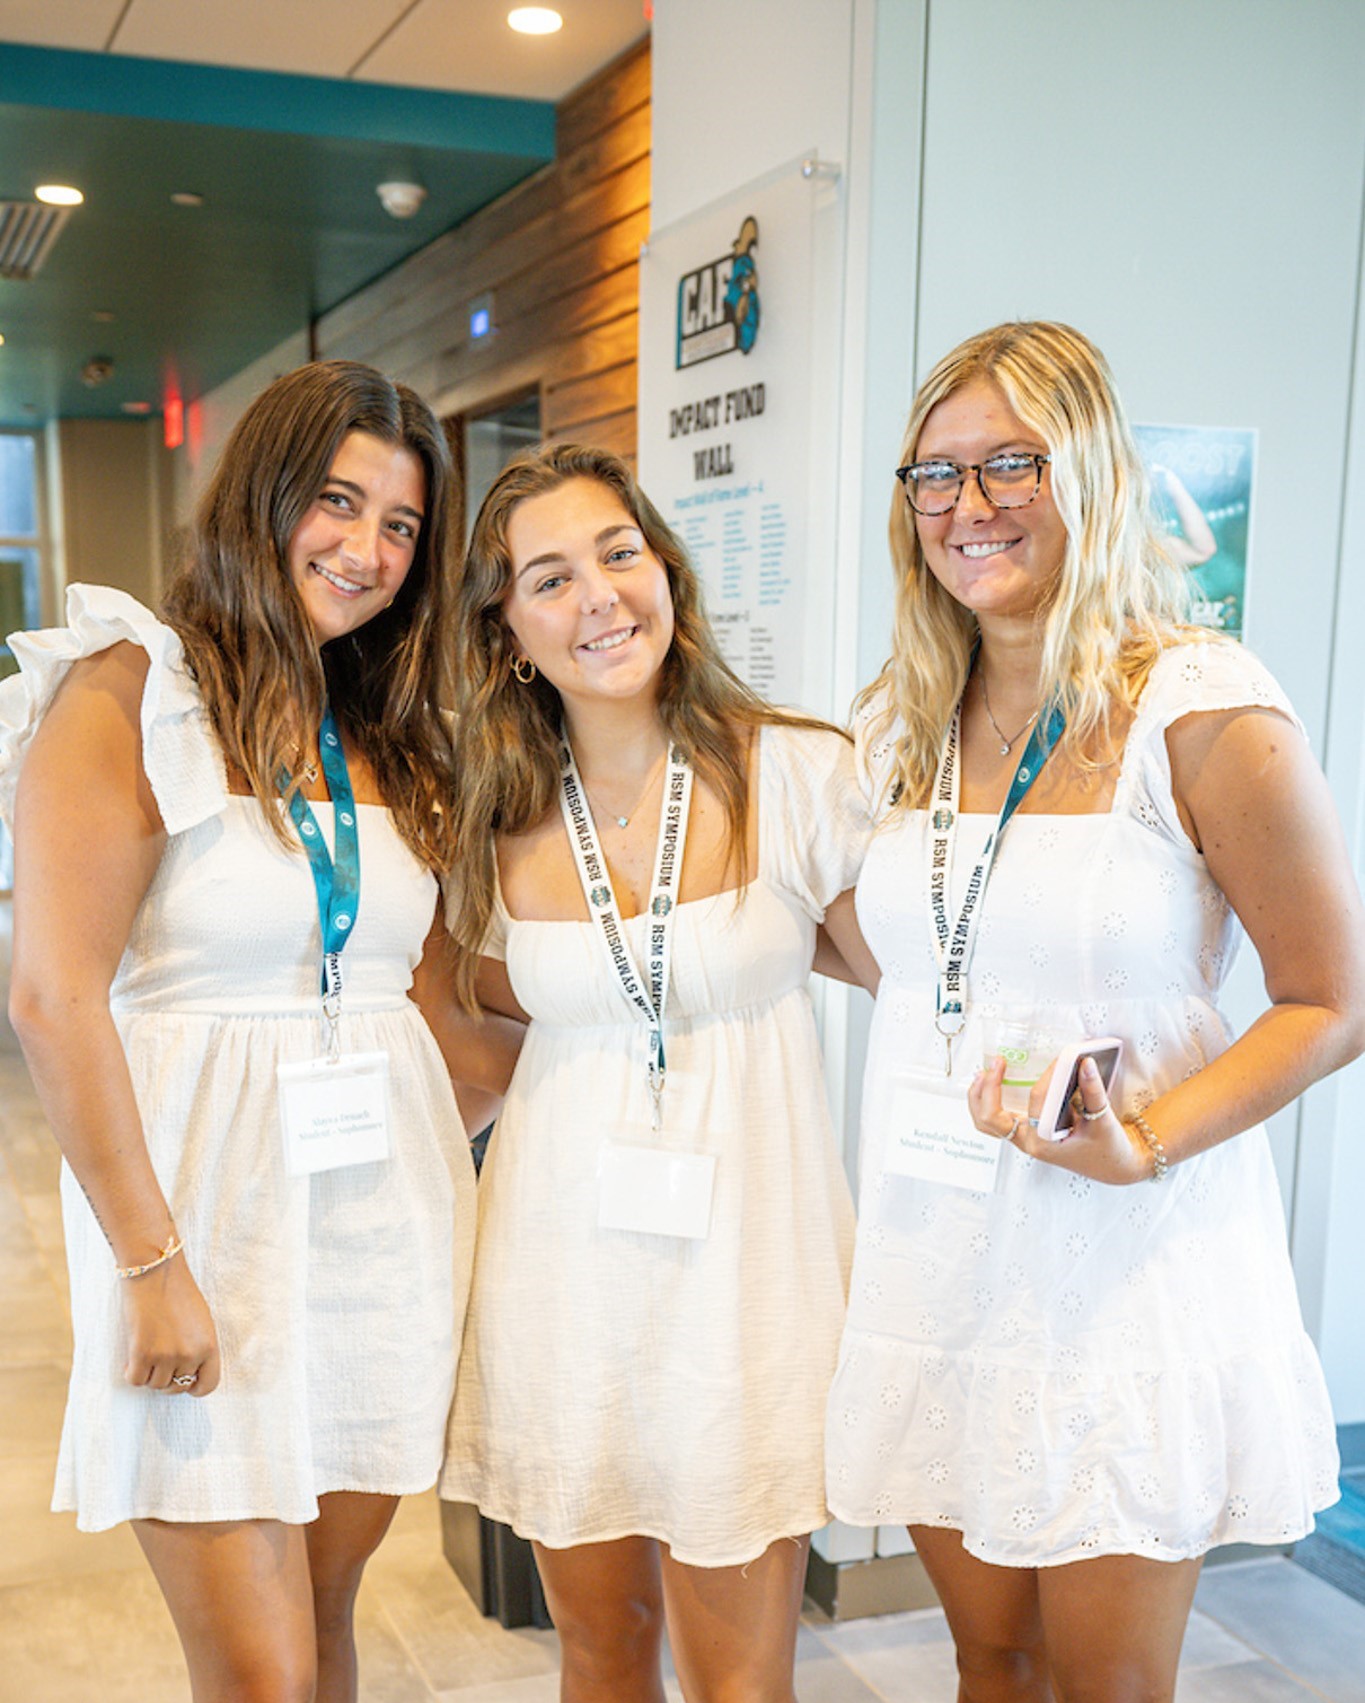 Three girls at the Symposium - All in white dresses